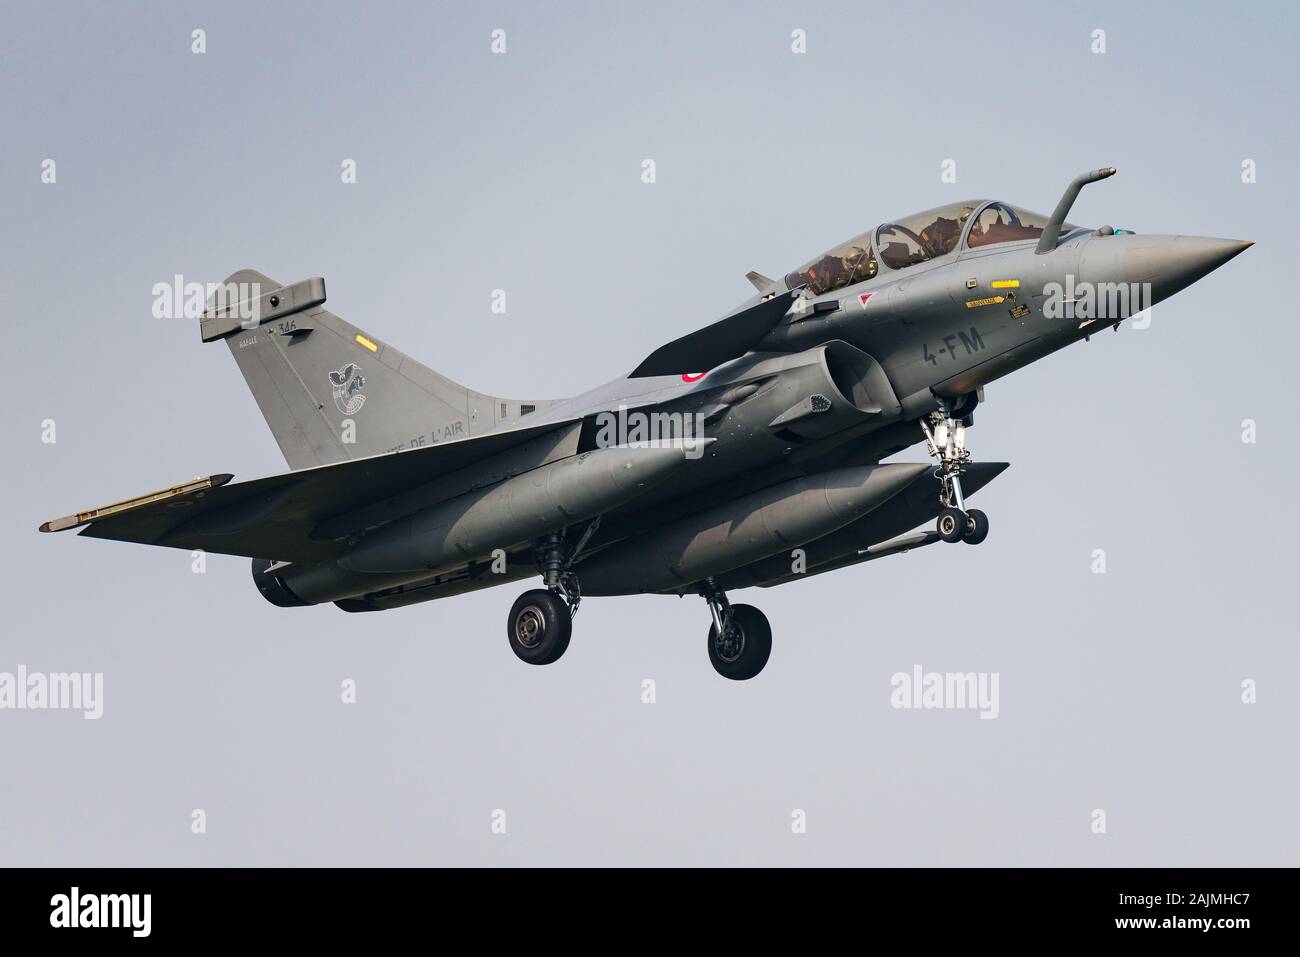 A Dassault Rafale fighter jet of the French Air Force. The Rafale is a French twin-engine, canard delta wing, multirole fighter aircraft. Stock Photo